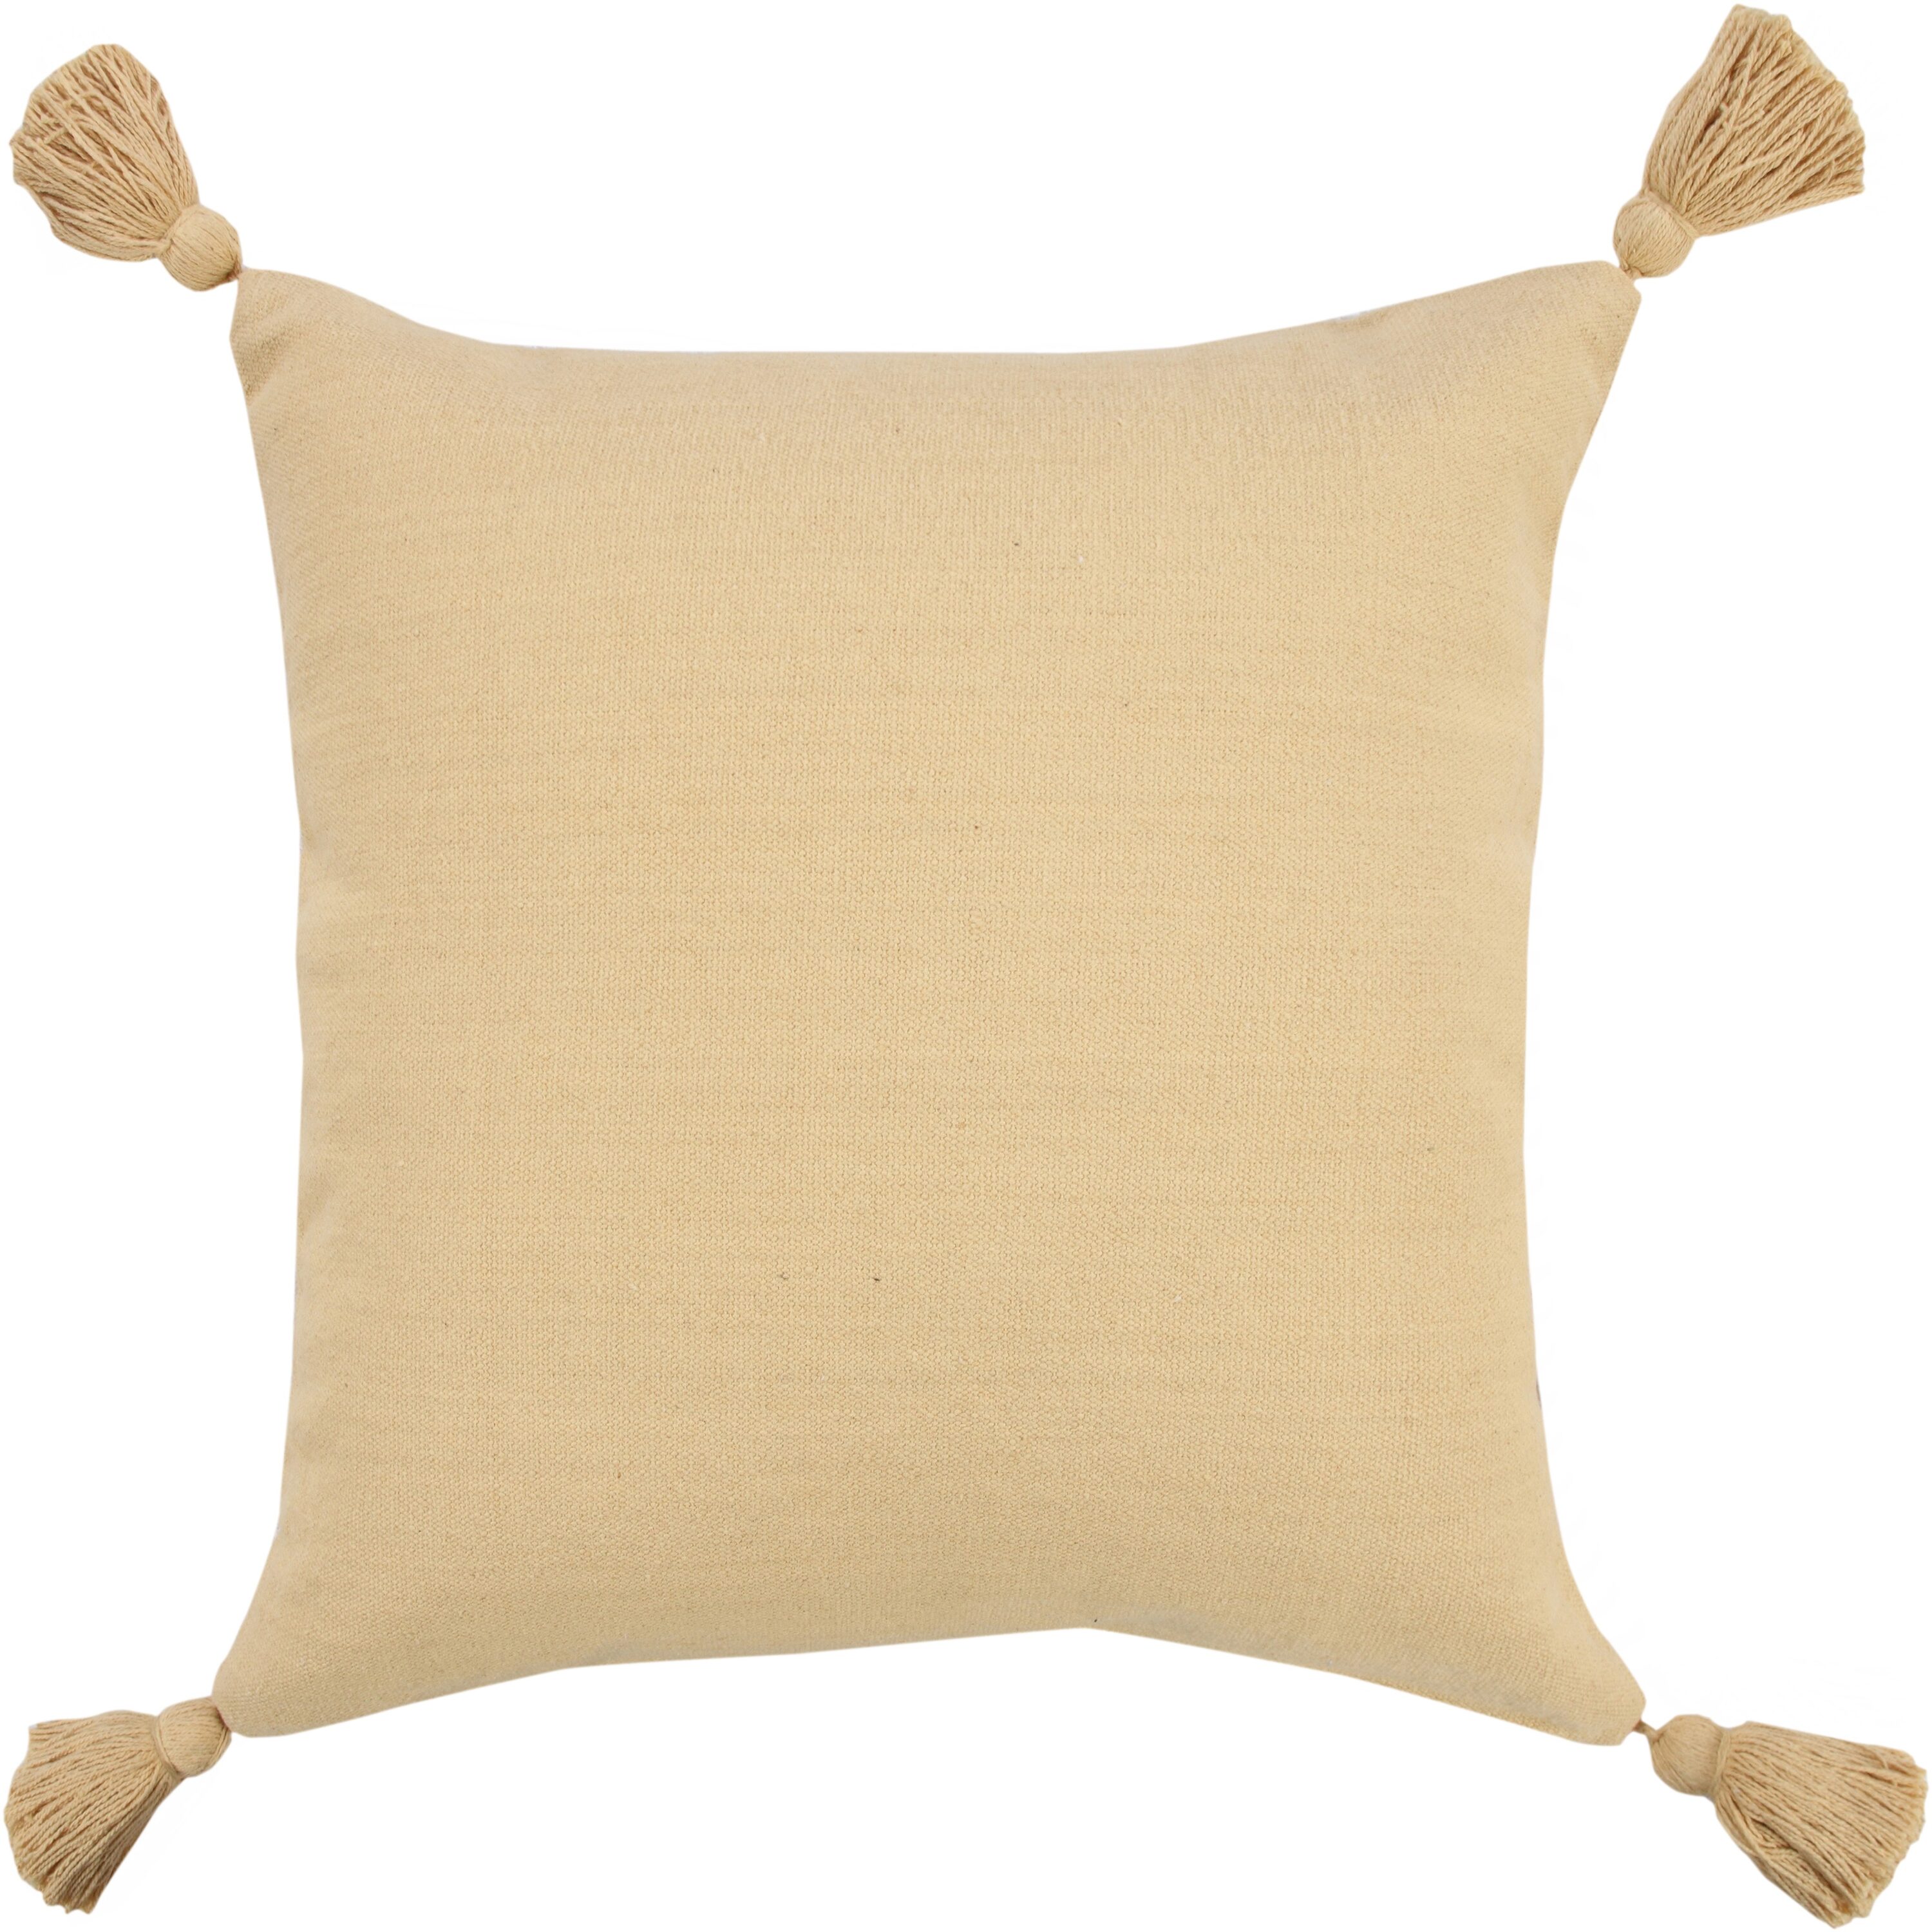 LR Home Stacy Garcia 20-in x 20-in Ochre/Ivory Indoor Decorative Pillow in Yellow | 3752A0590304J8